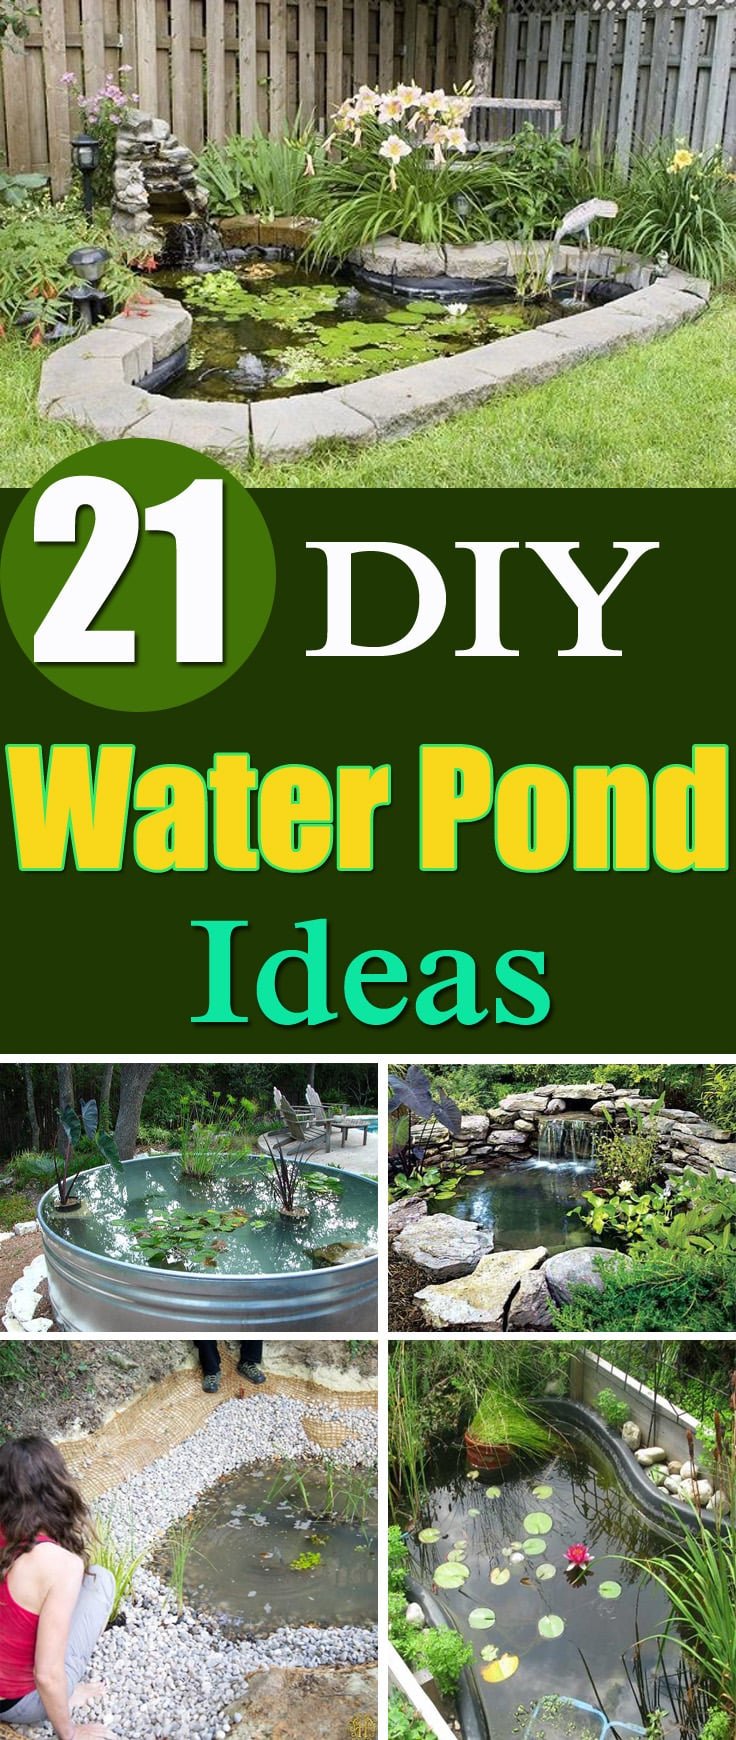 If you've got a backyard and adding a water feature is your dream, follow it by trying one of these DIY Water Pond Ideas!